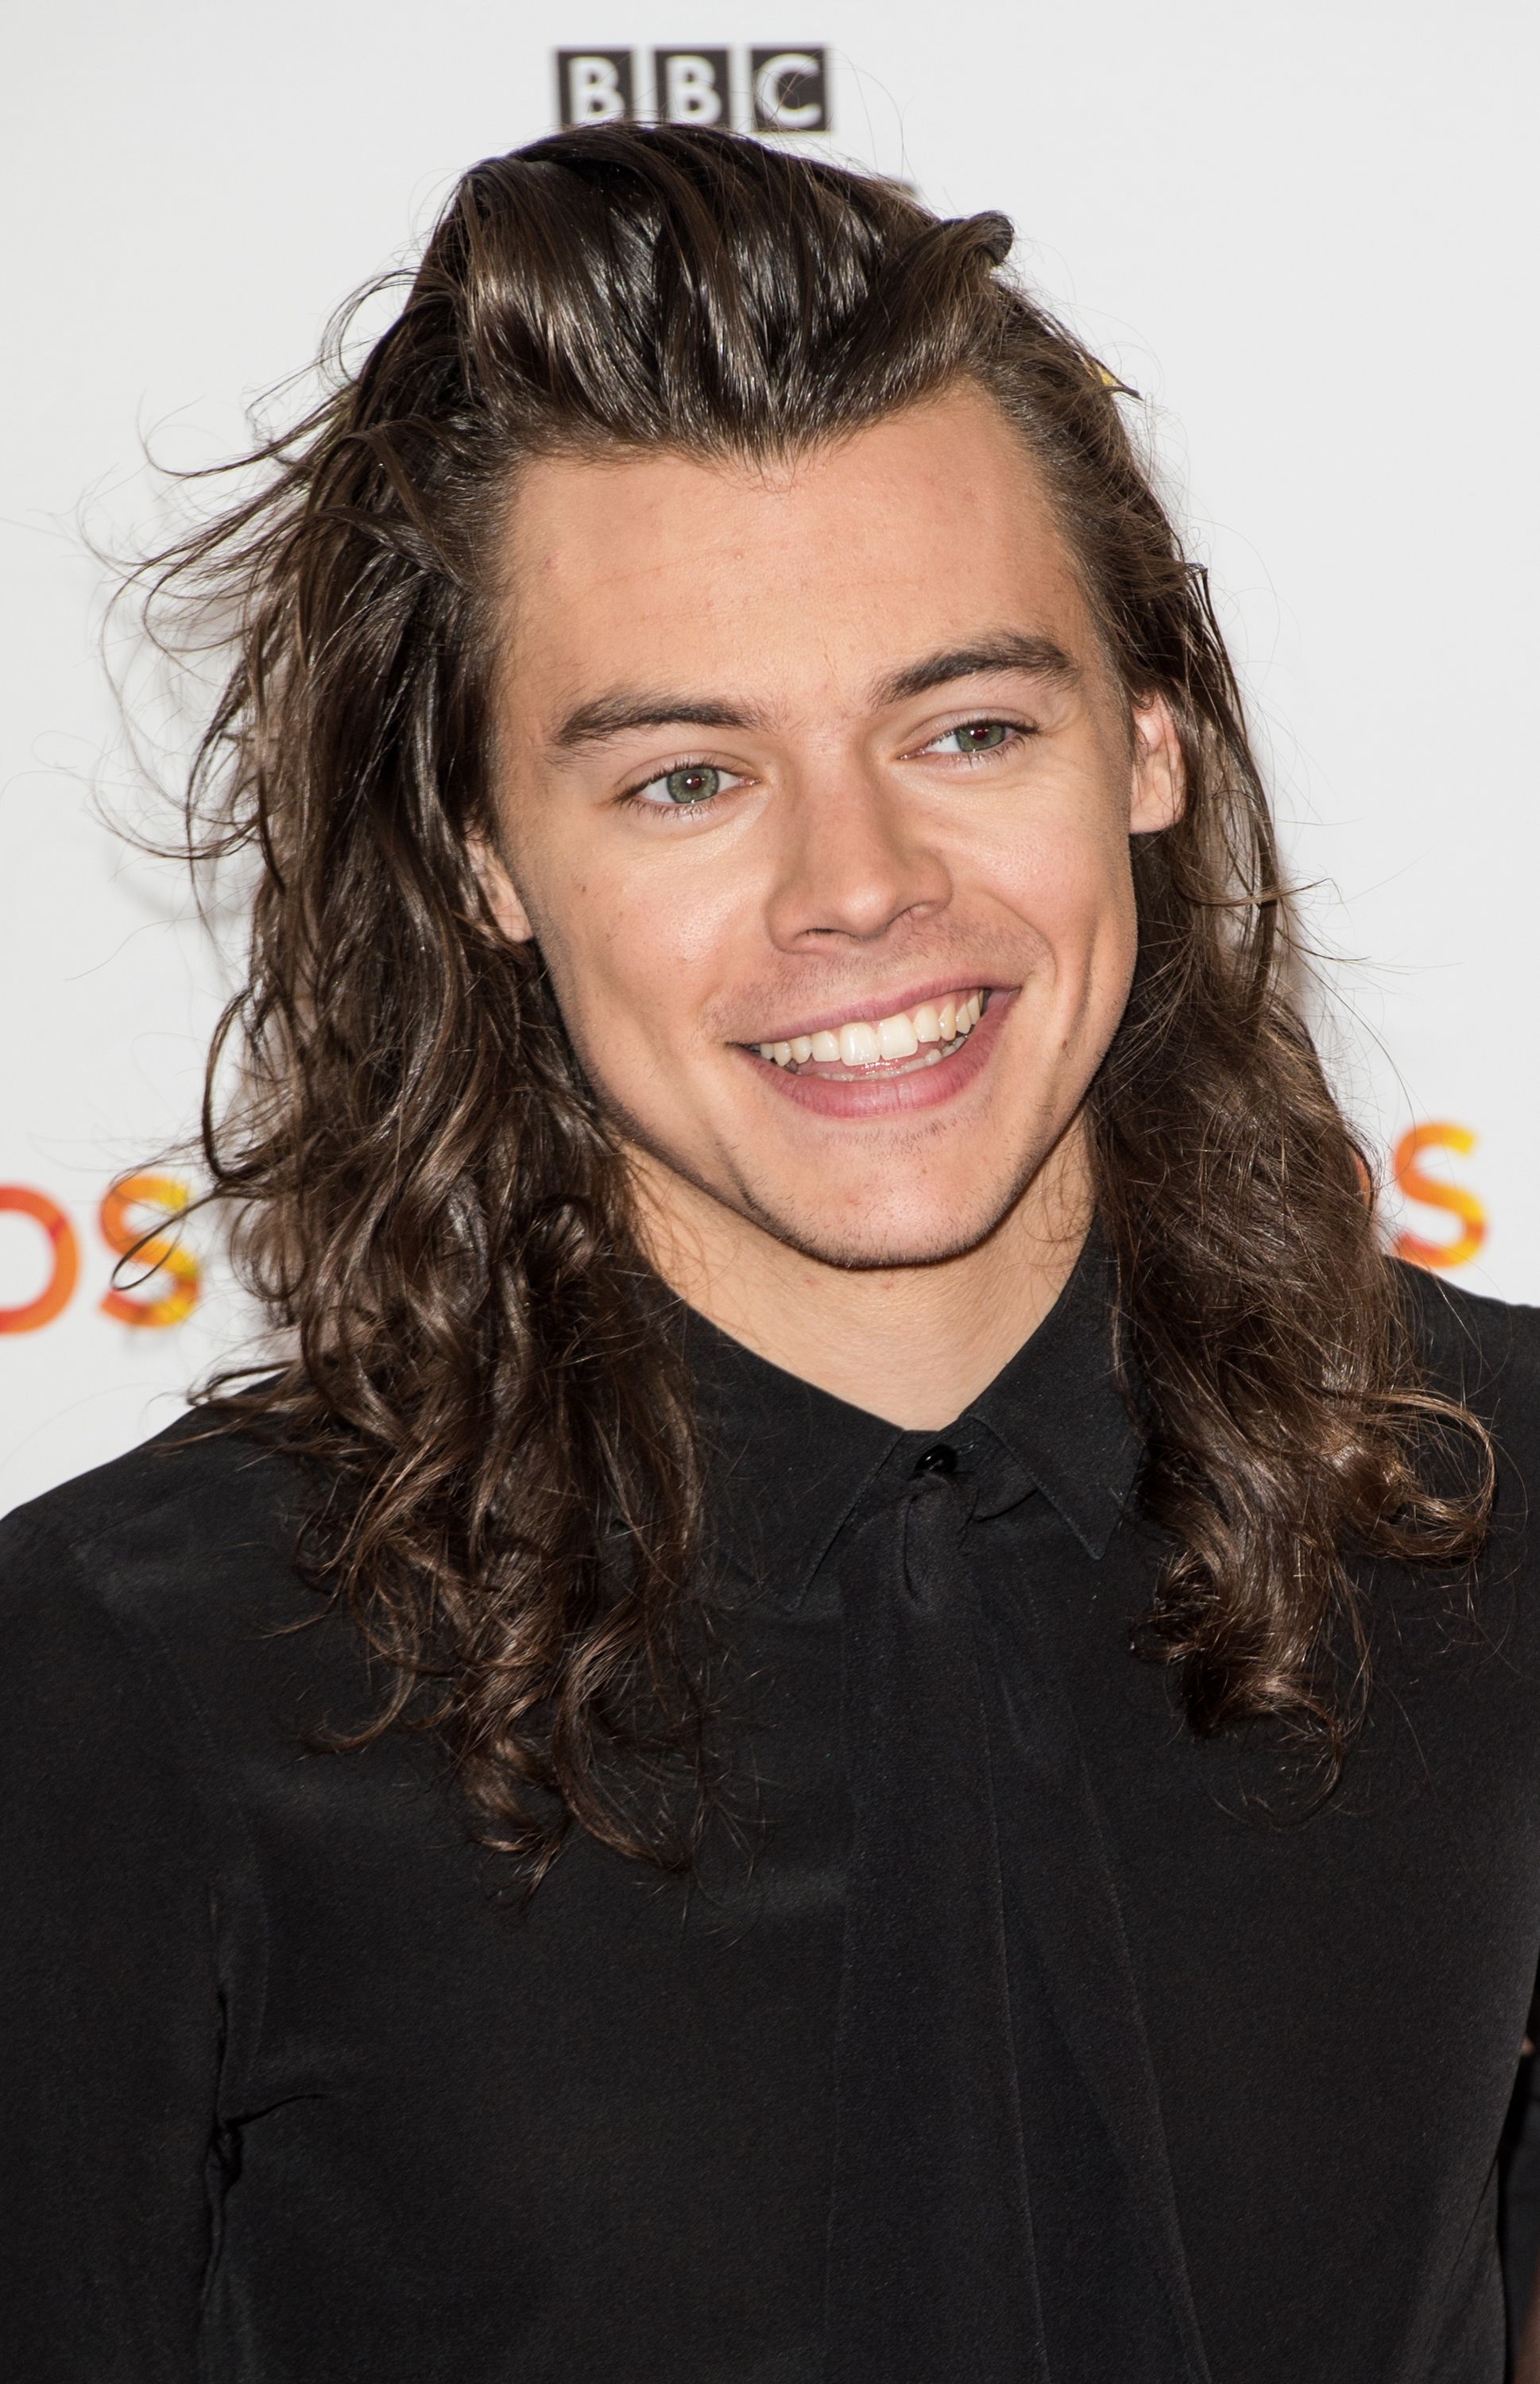 Harry Styles' birthday: Looking back at the singer's sartorial evolution